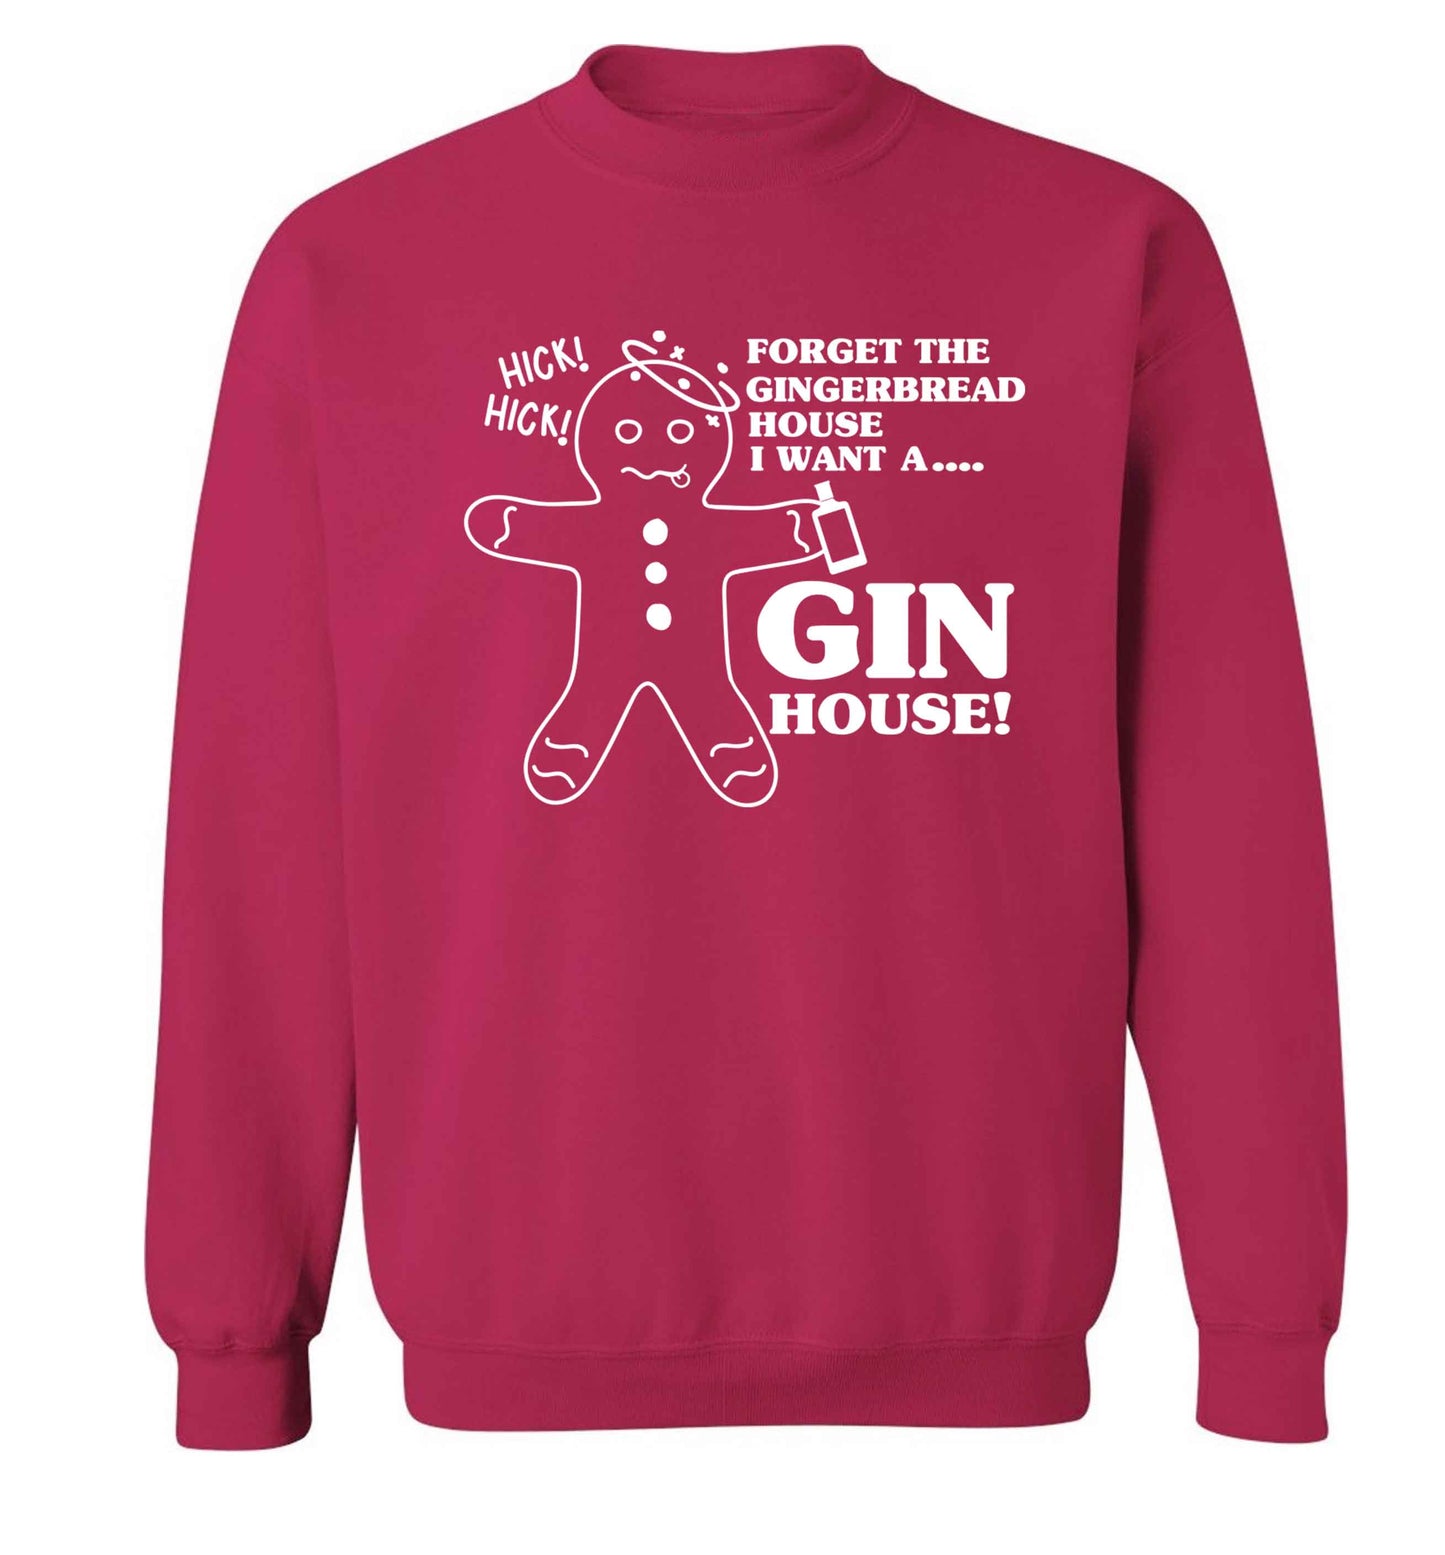 Forget the gingerbread house I want a gin house Adult's unisex pink Sweater 2XL